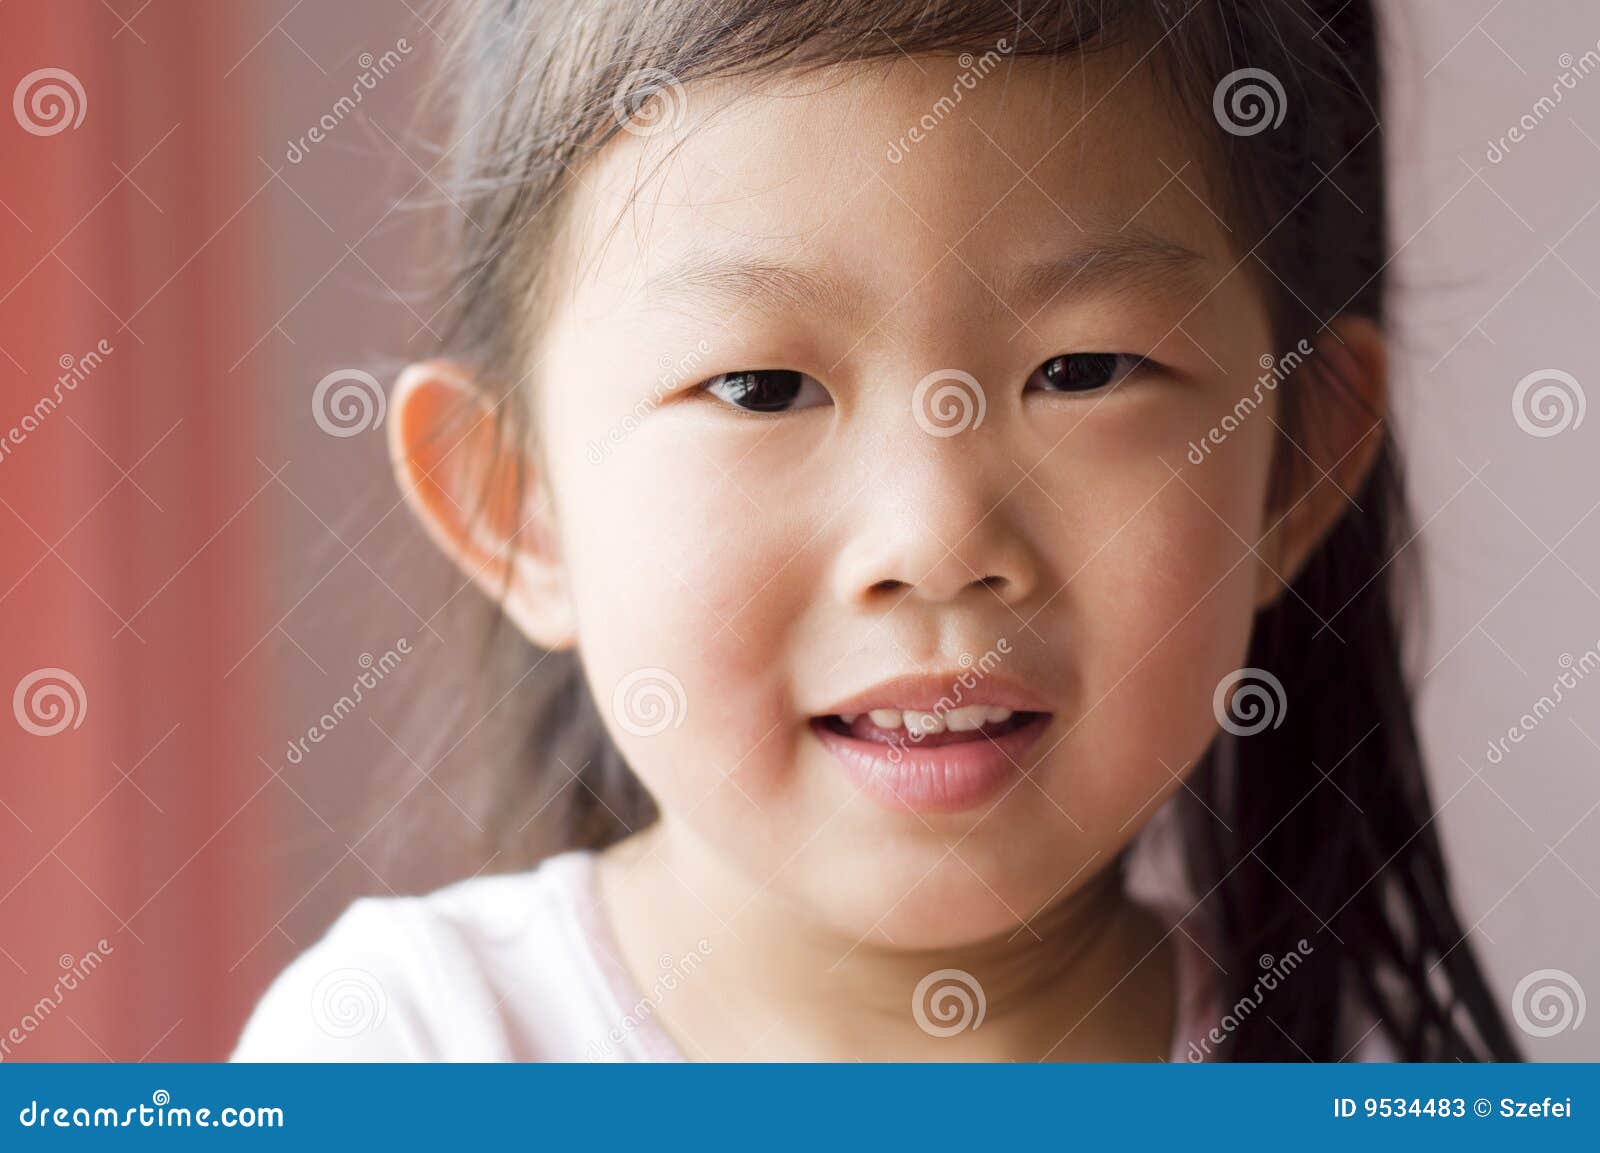 Asian girl stock image. Image of concept, alive, children - 9534483